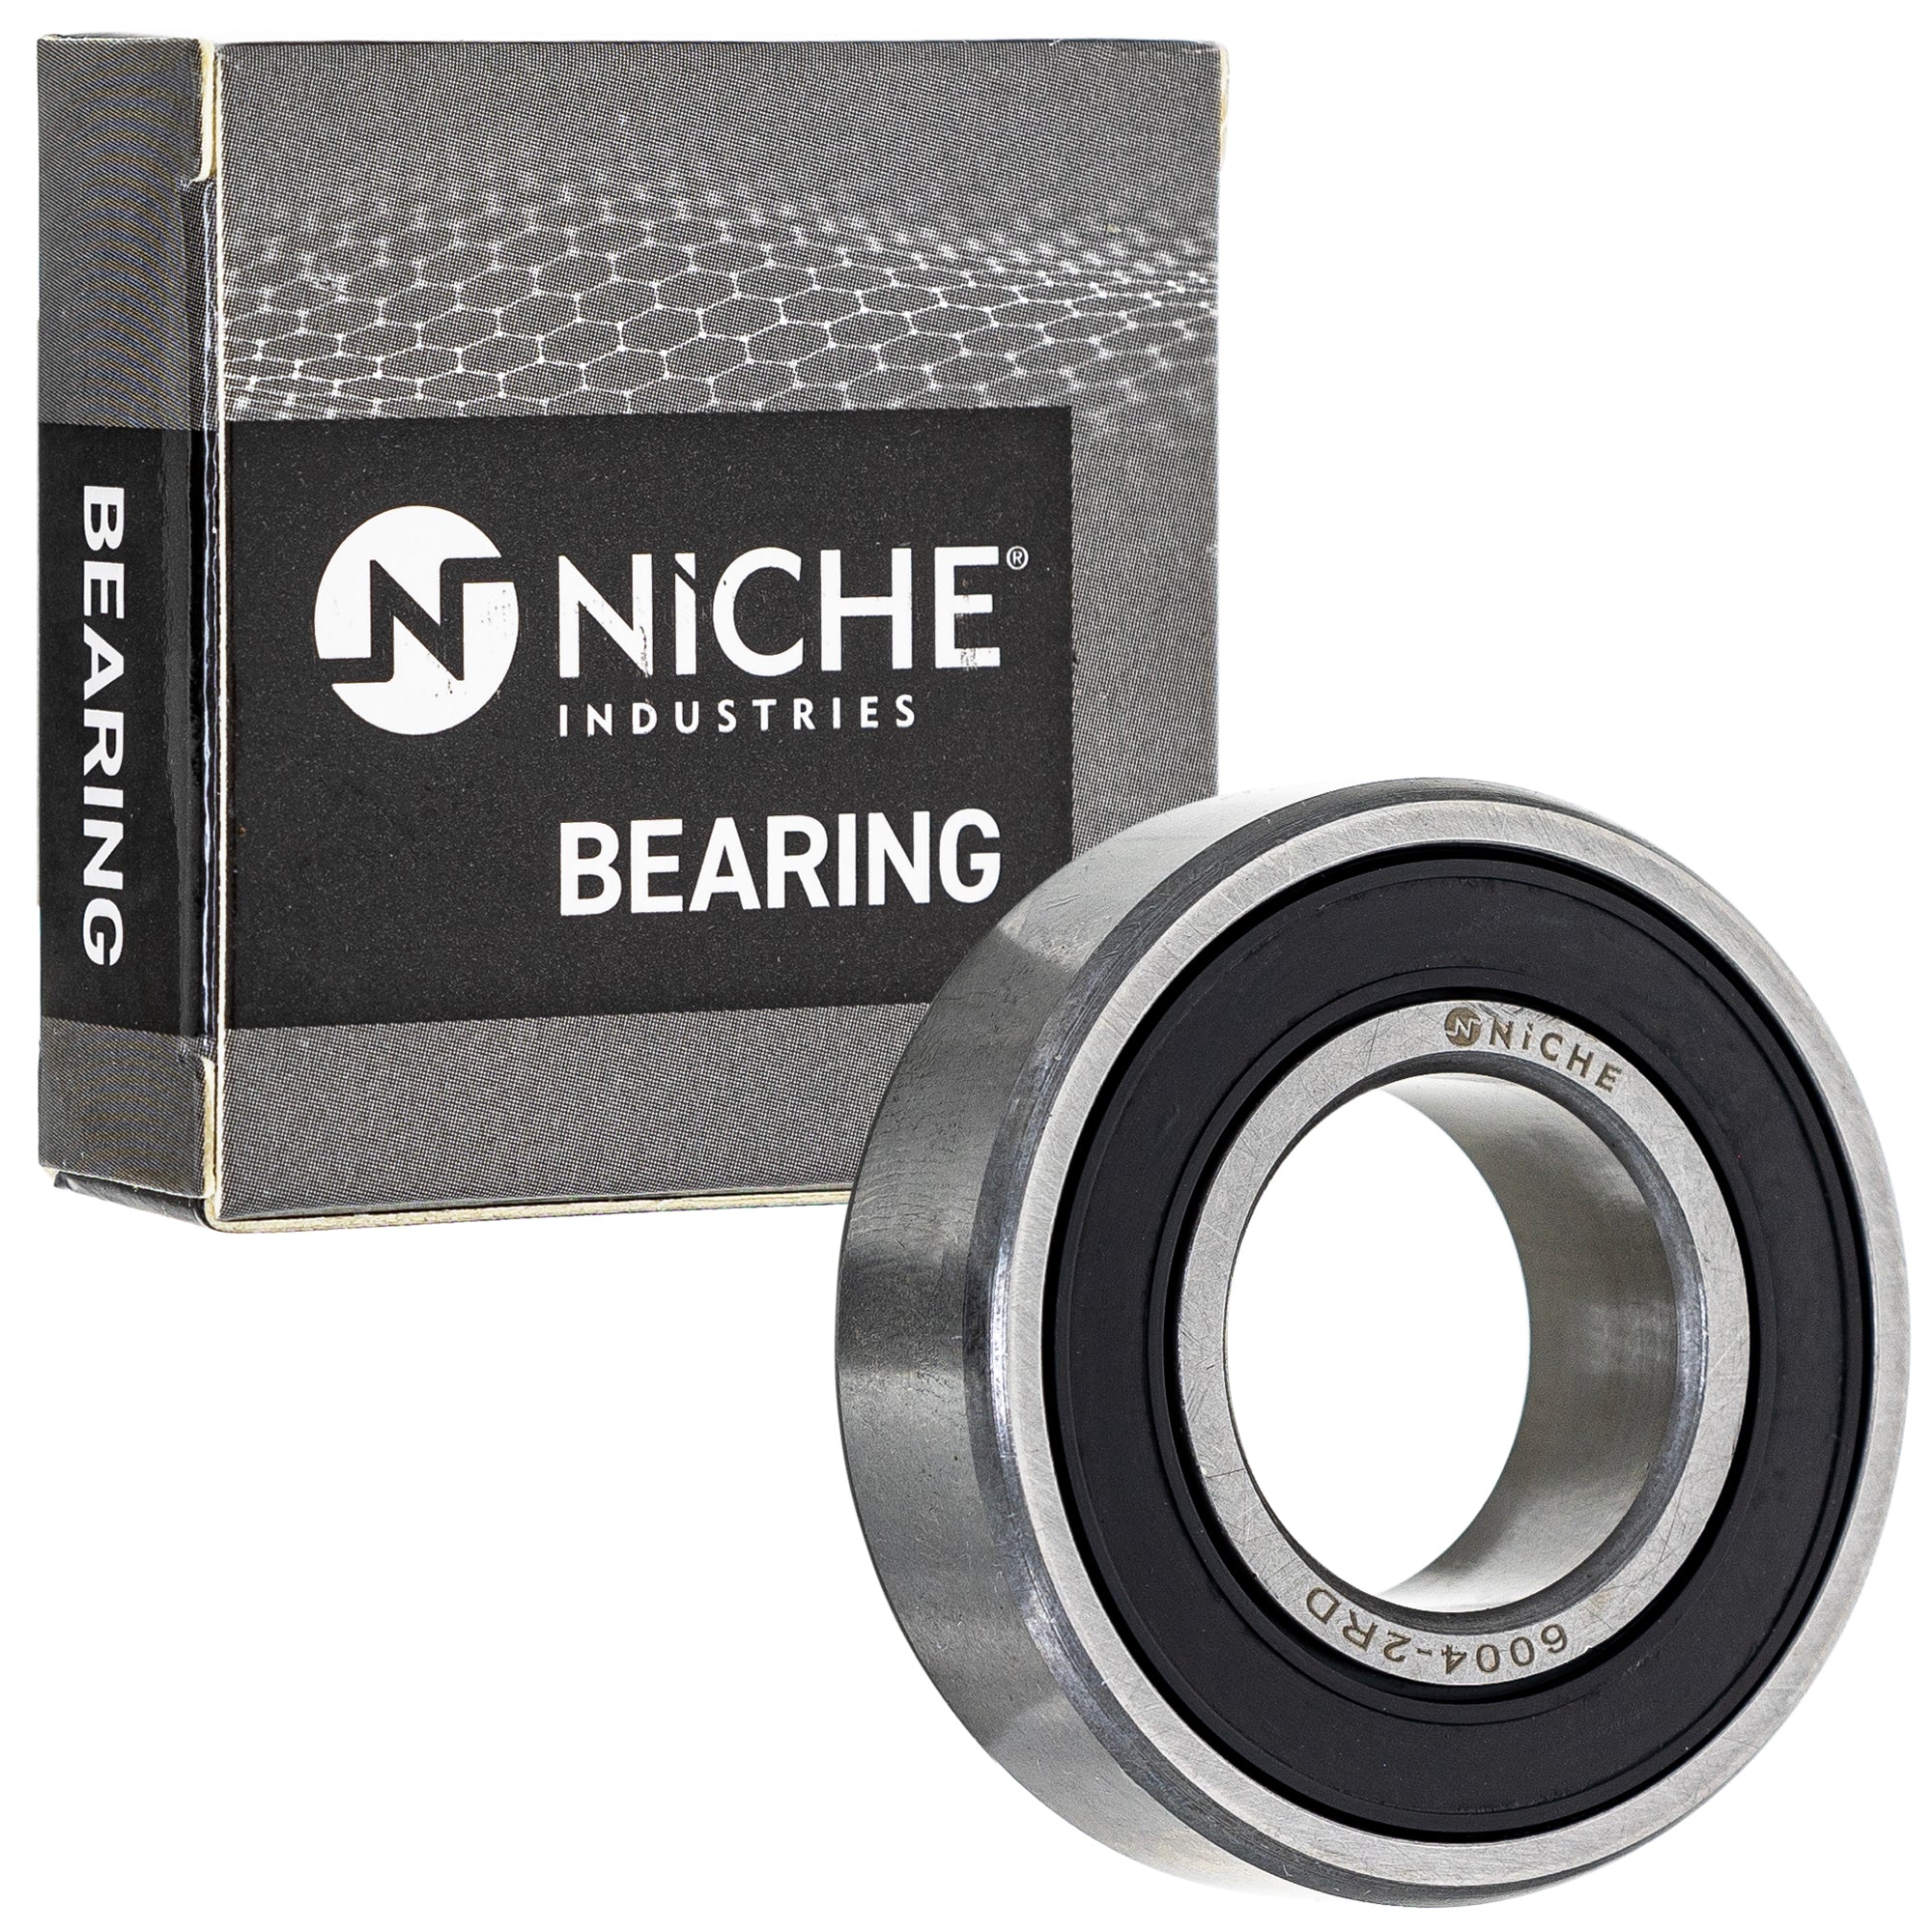 NICHE 519-CBB2230R Bearing & Seal Kit 2-Pack for zOTHER TRX300X